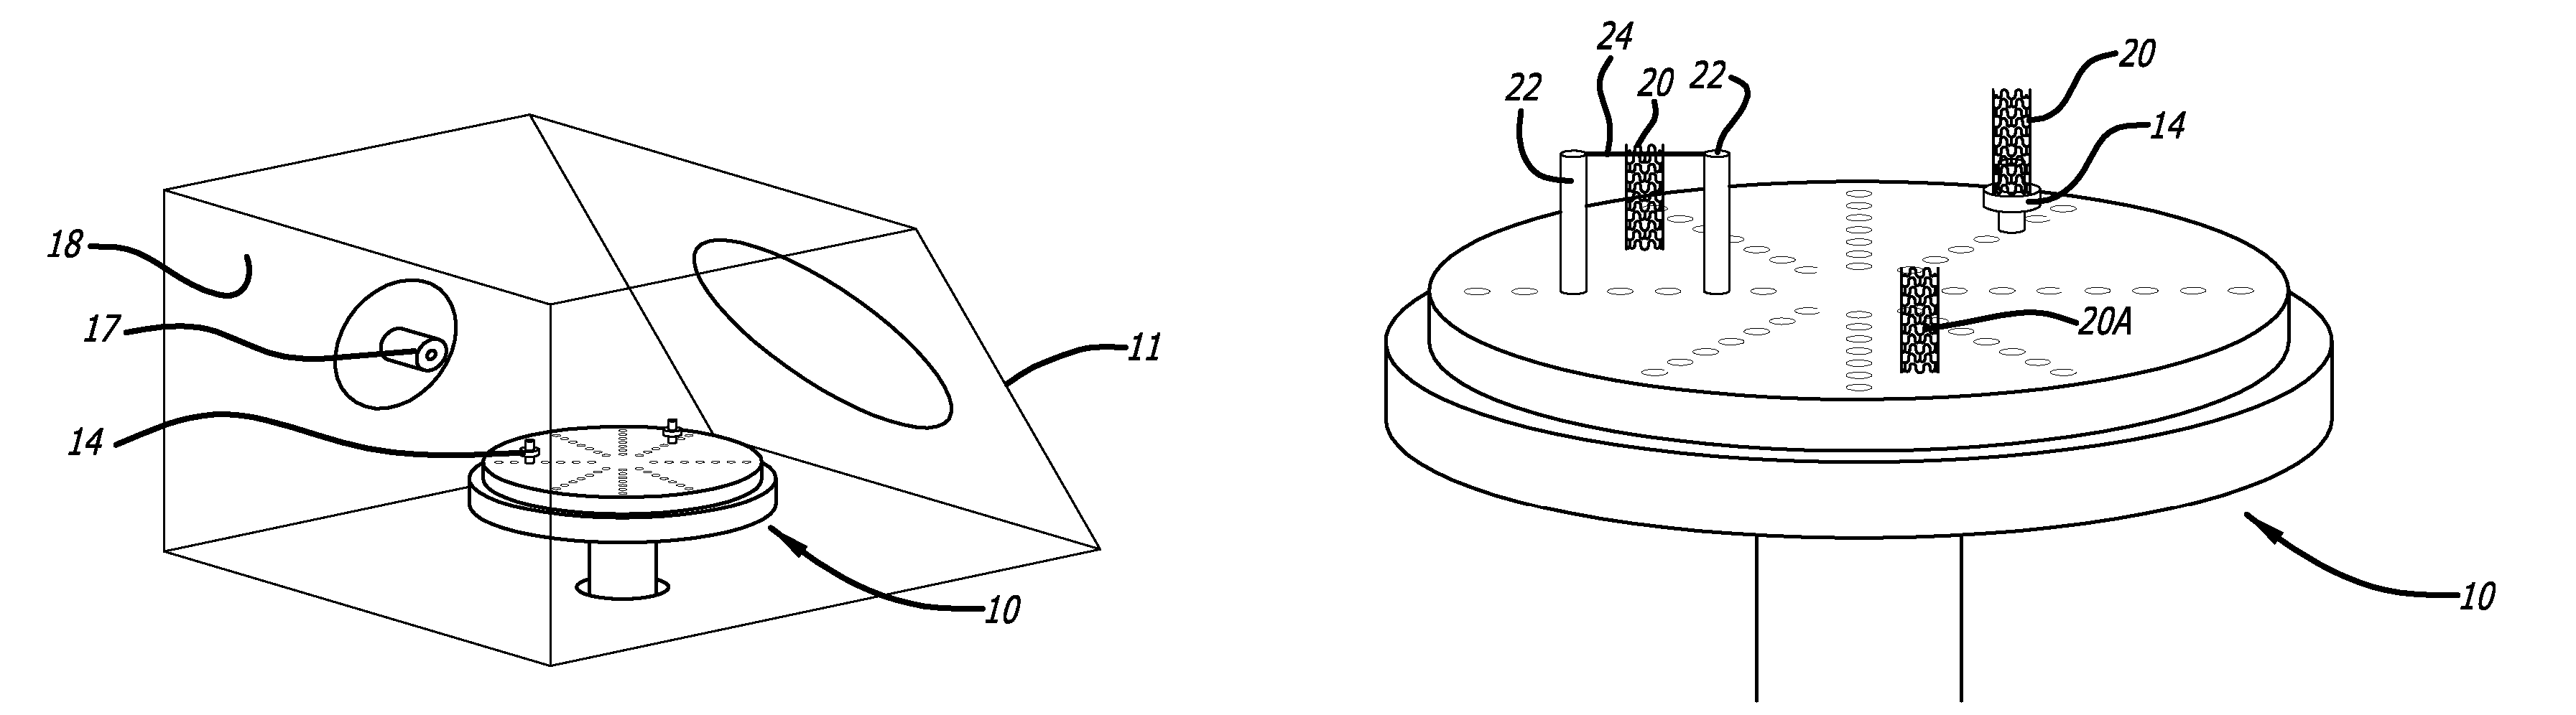 Medical devices having textured surfaces